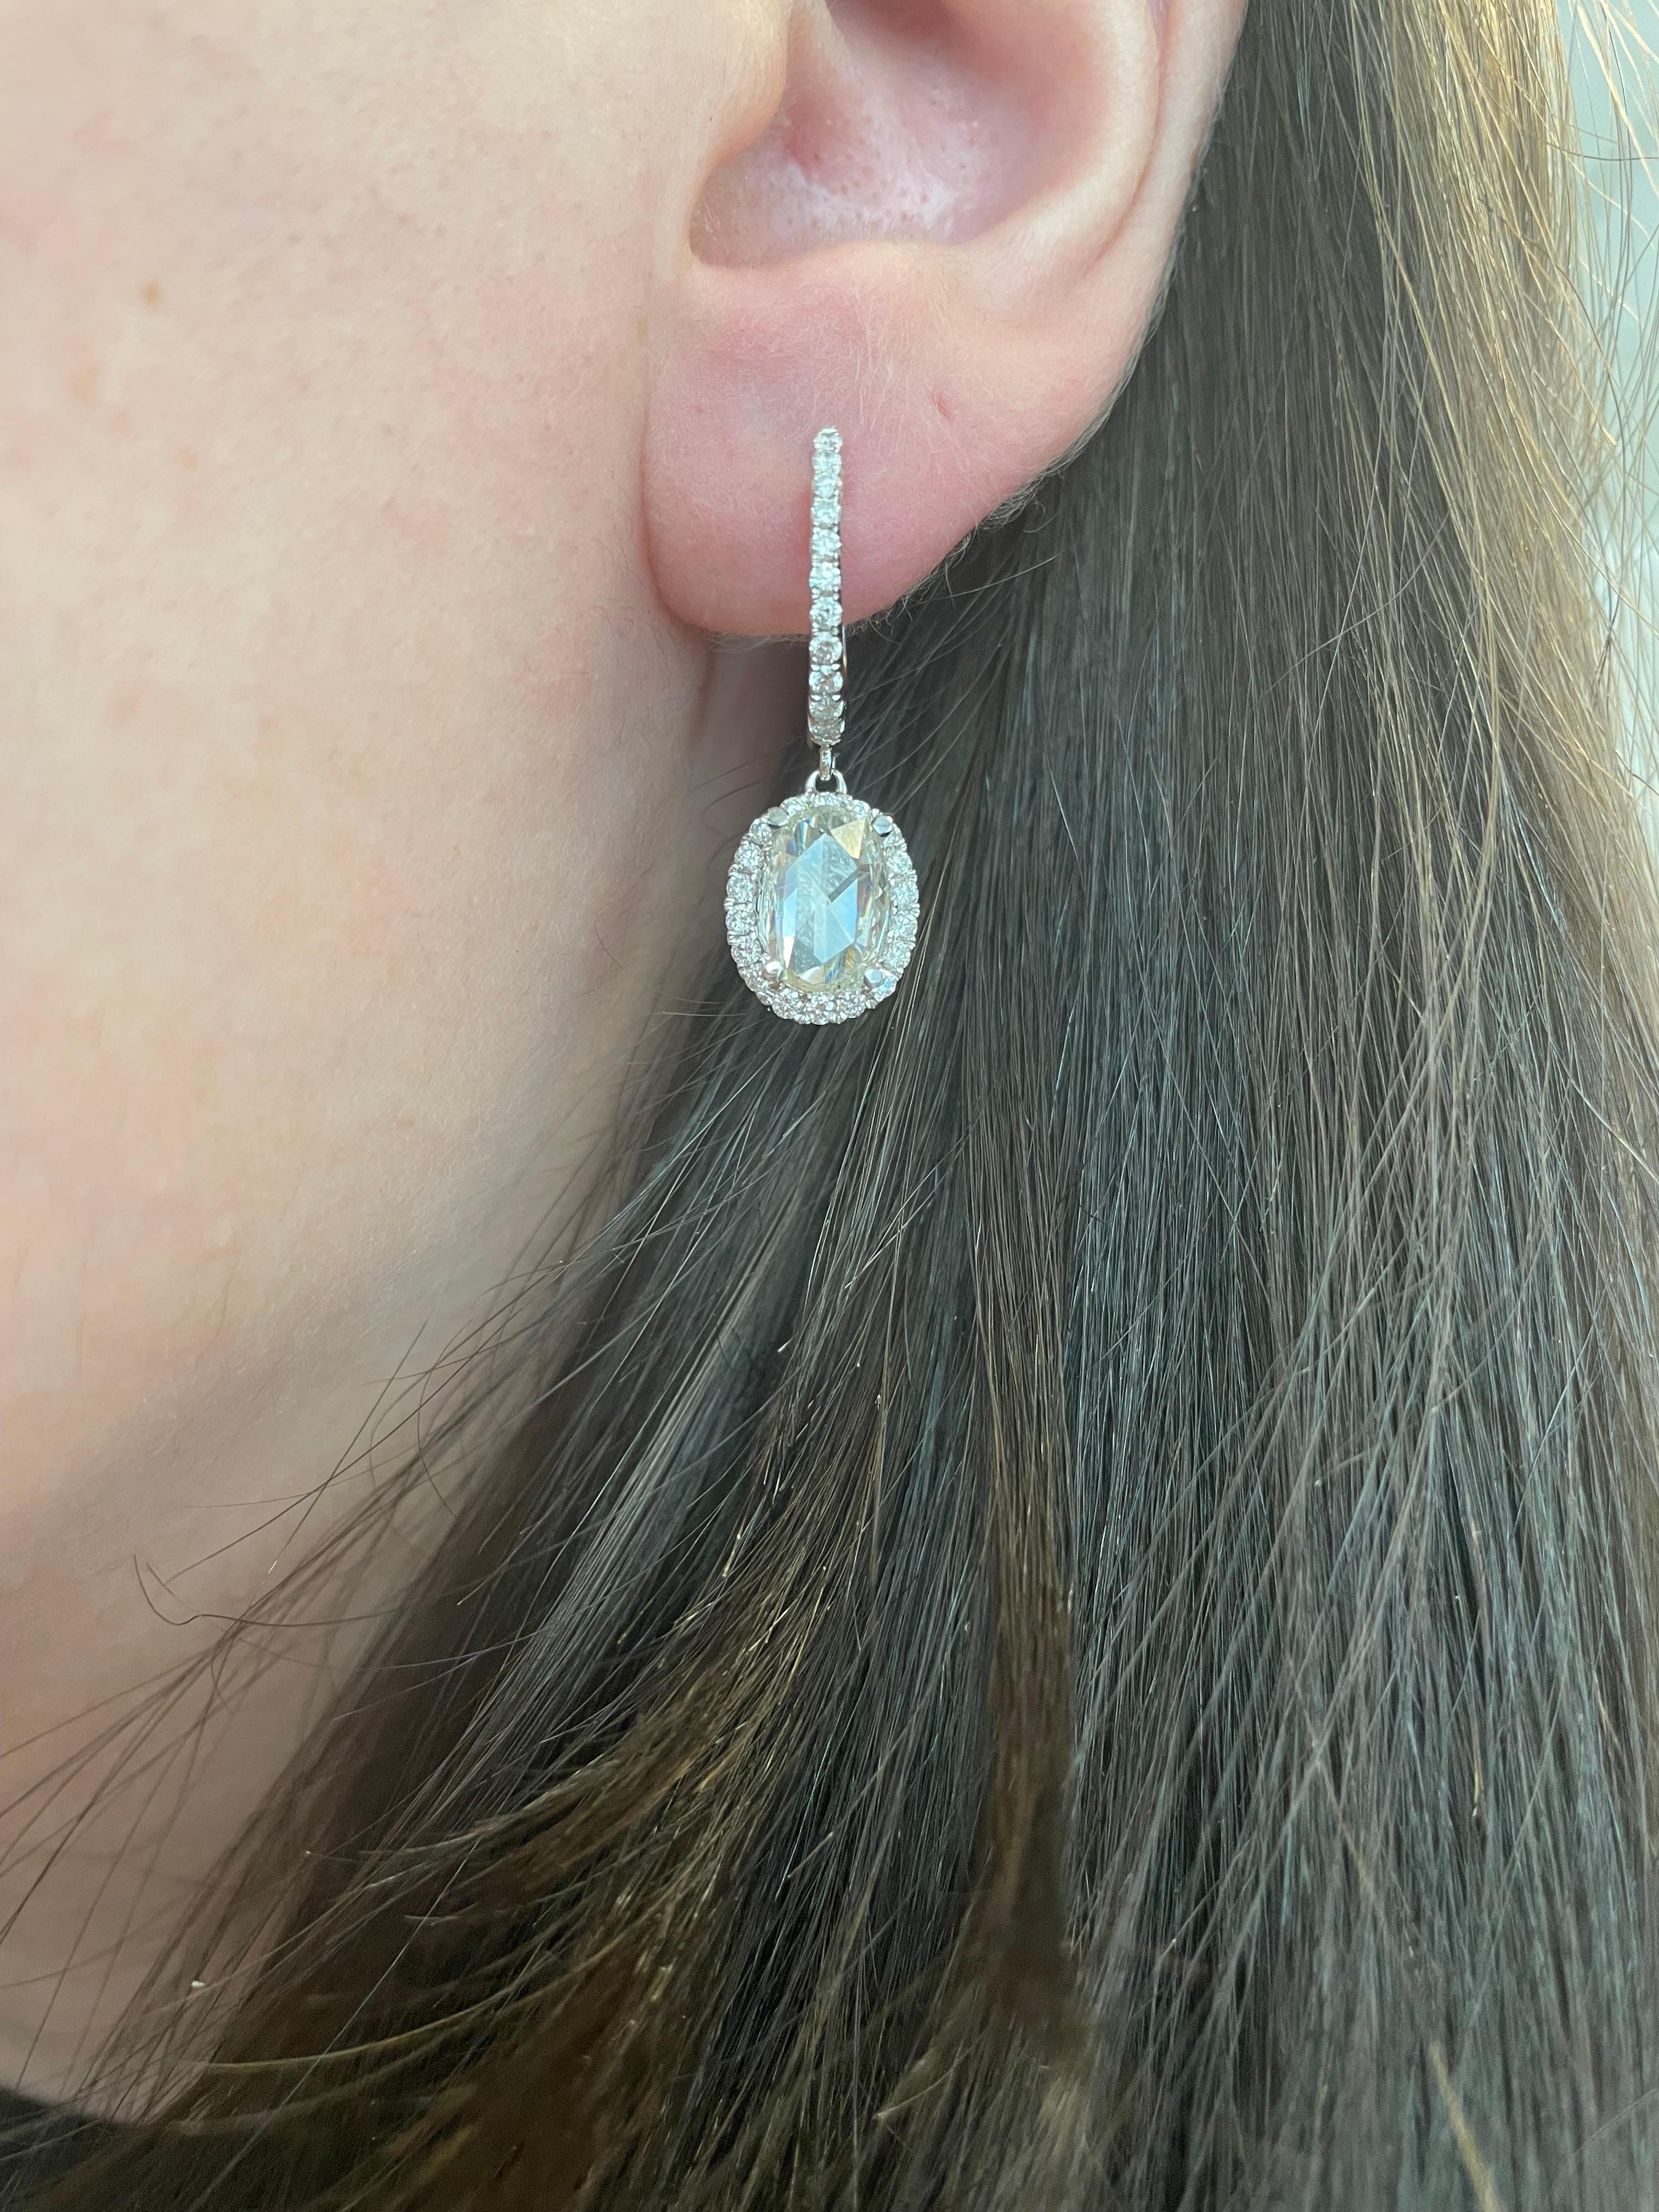 Unique modern oval rose cut diamond with halo drop earrings.
2 oval rose cut diamonds, 2.85 carats. Approximately I/J color and VS2/SI1 clarity. Complimented by 58 round brilliant diamonds, 0.72 carats. Approximately G/H color and SI clarity. 18k